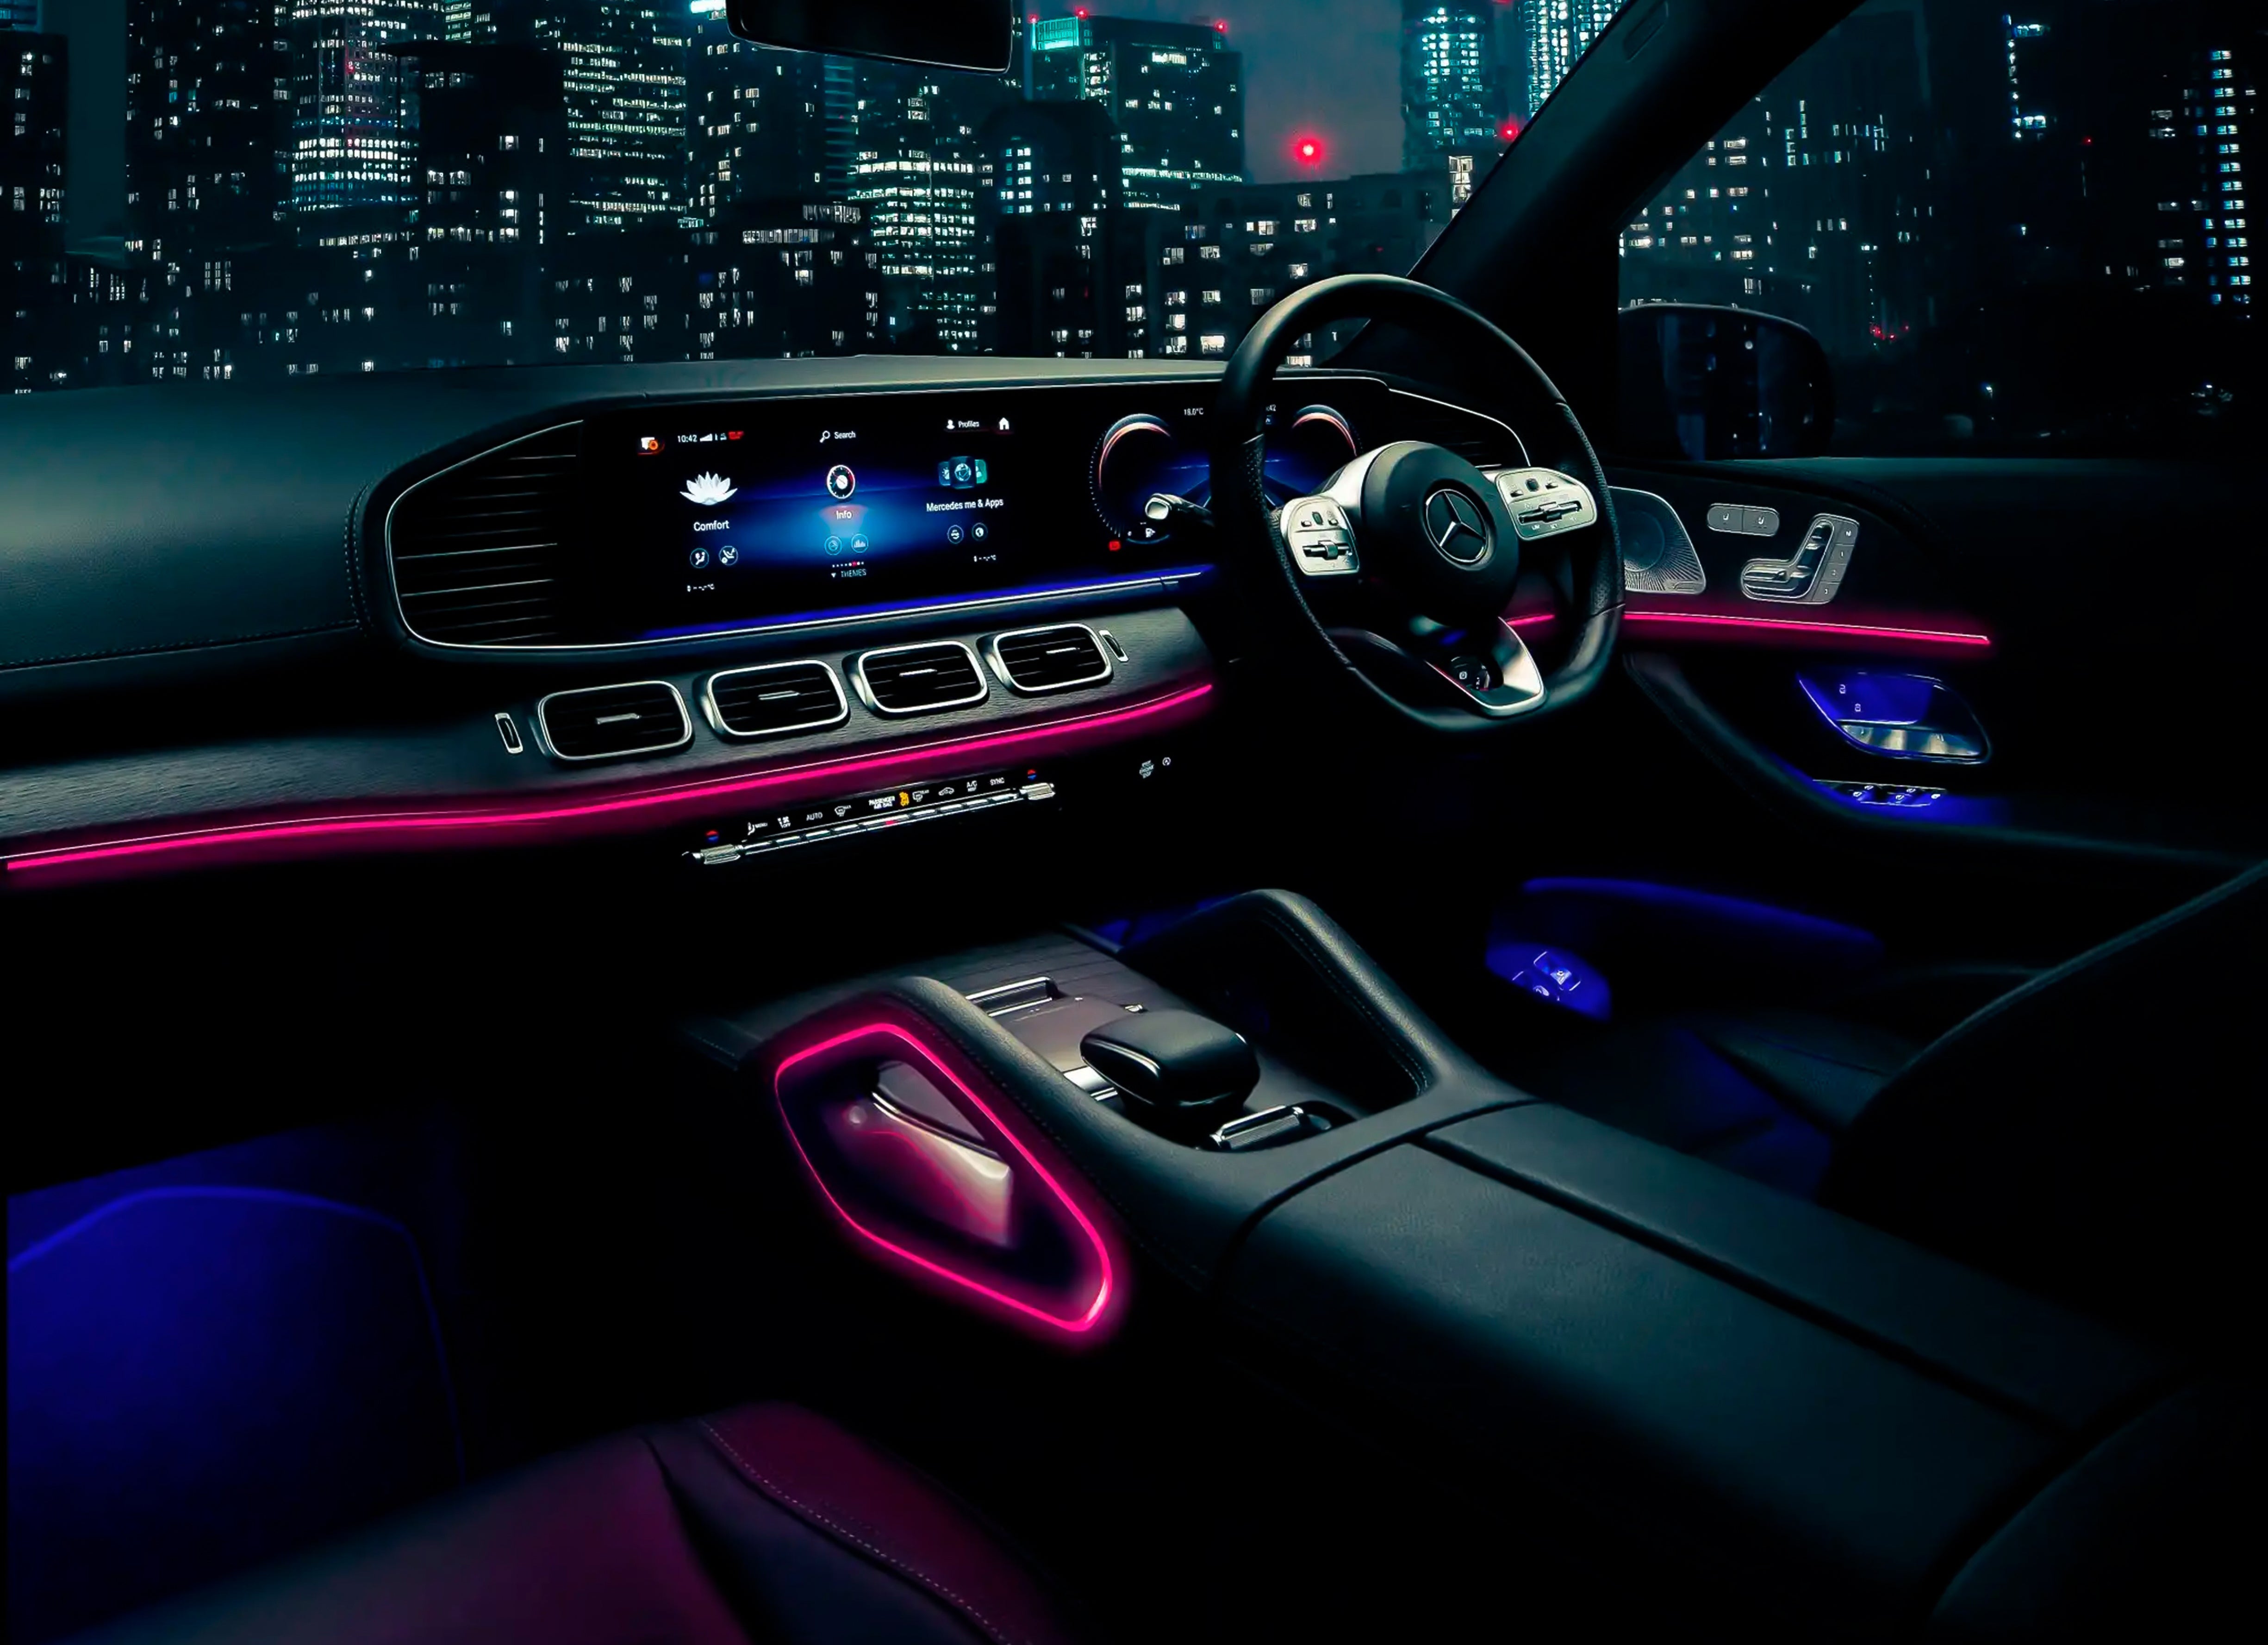 These 5 cars have the best ambient lighting in the world